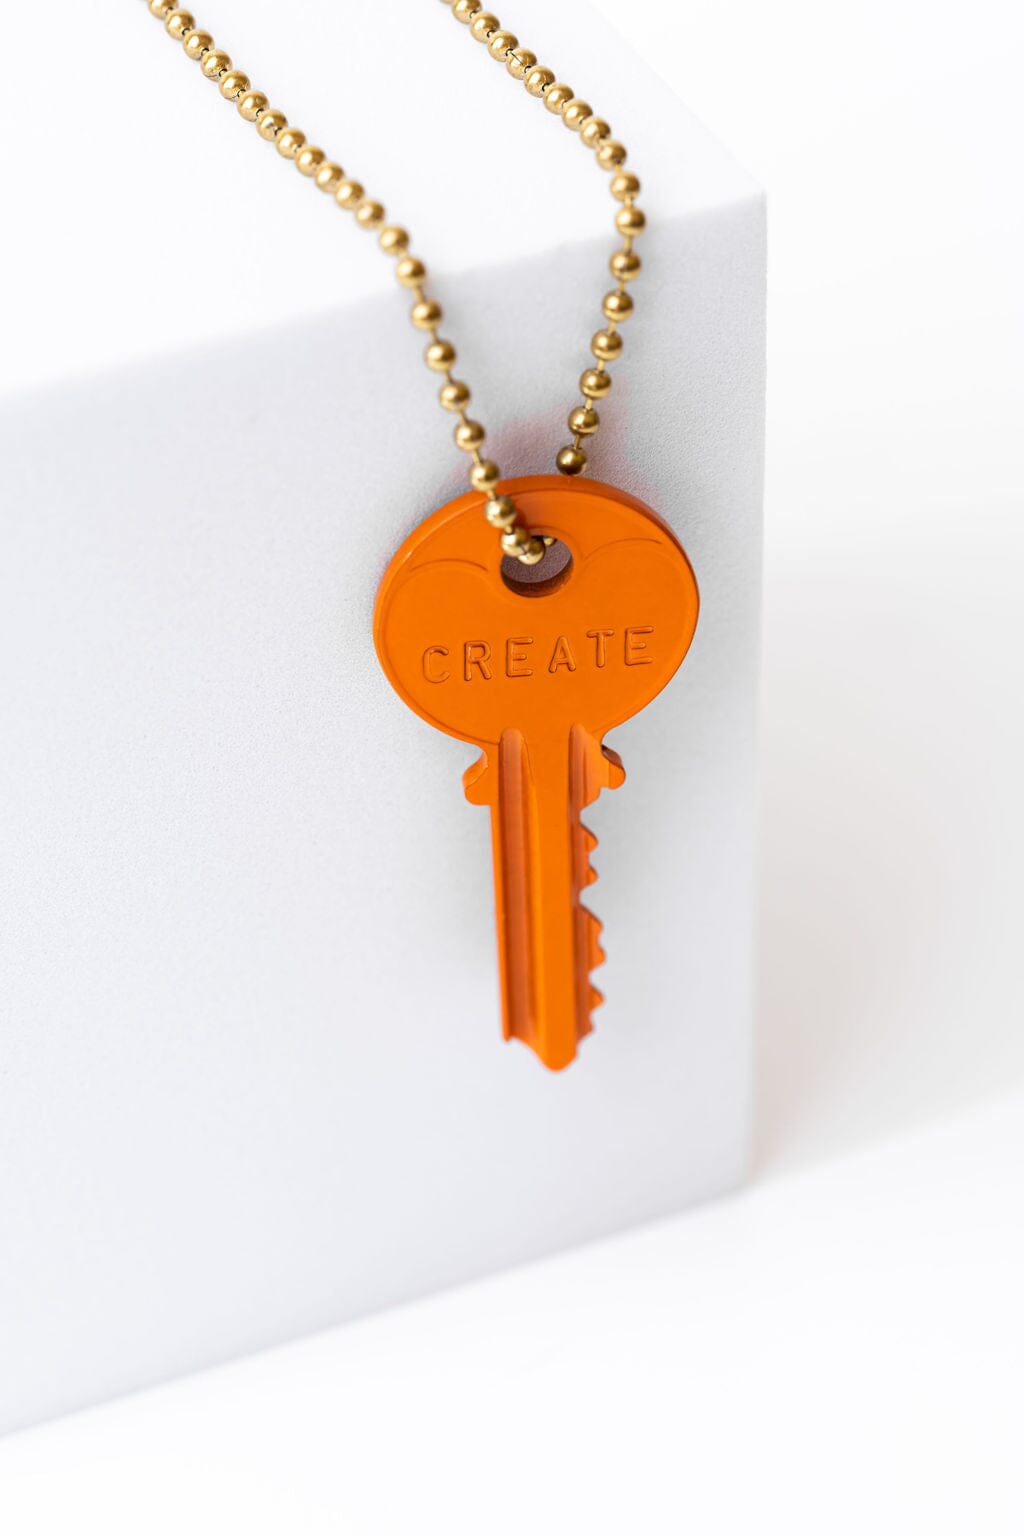 N - Orange Classic Ball Chain Key Necklace Necklaces The Giving Keys 